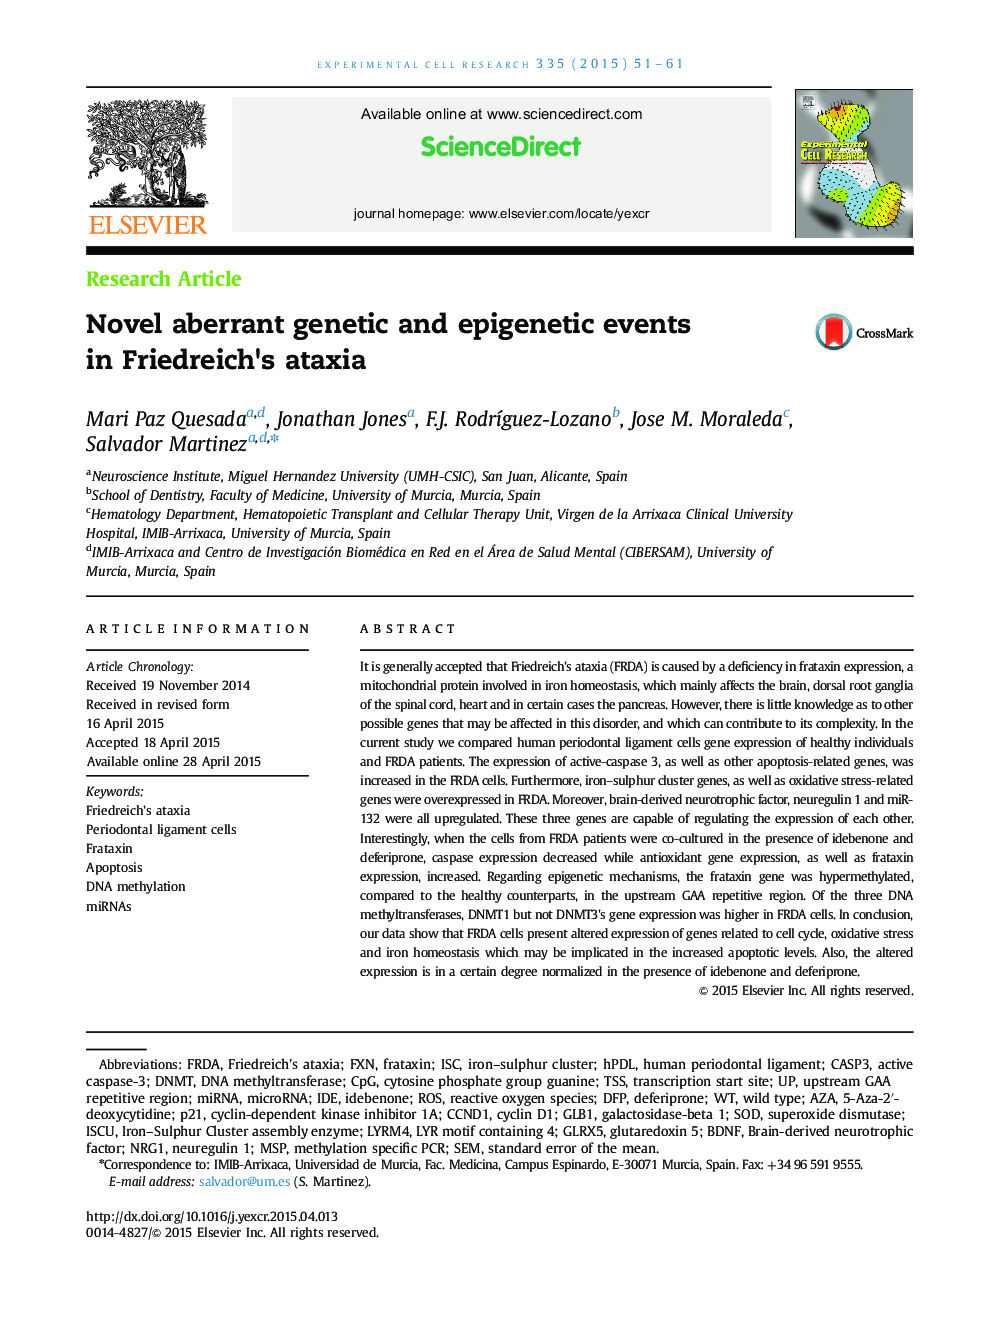 Novel aberrant genetic and epigenetic events in Friedreich×³s ataxia